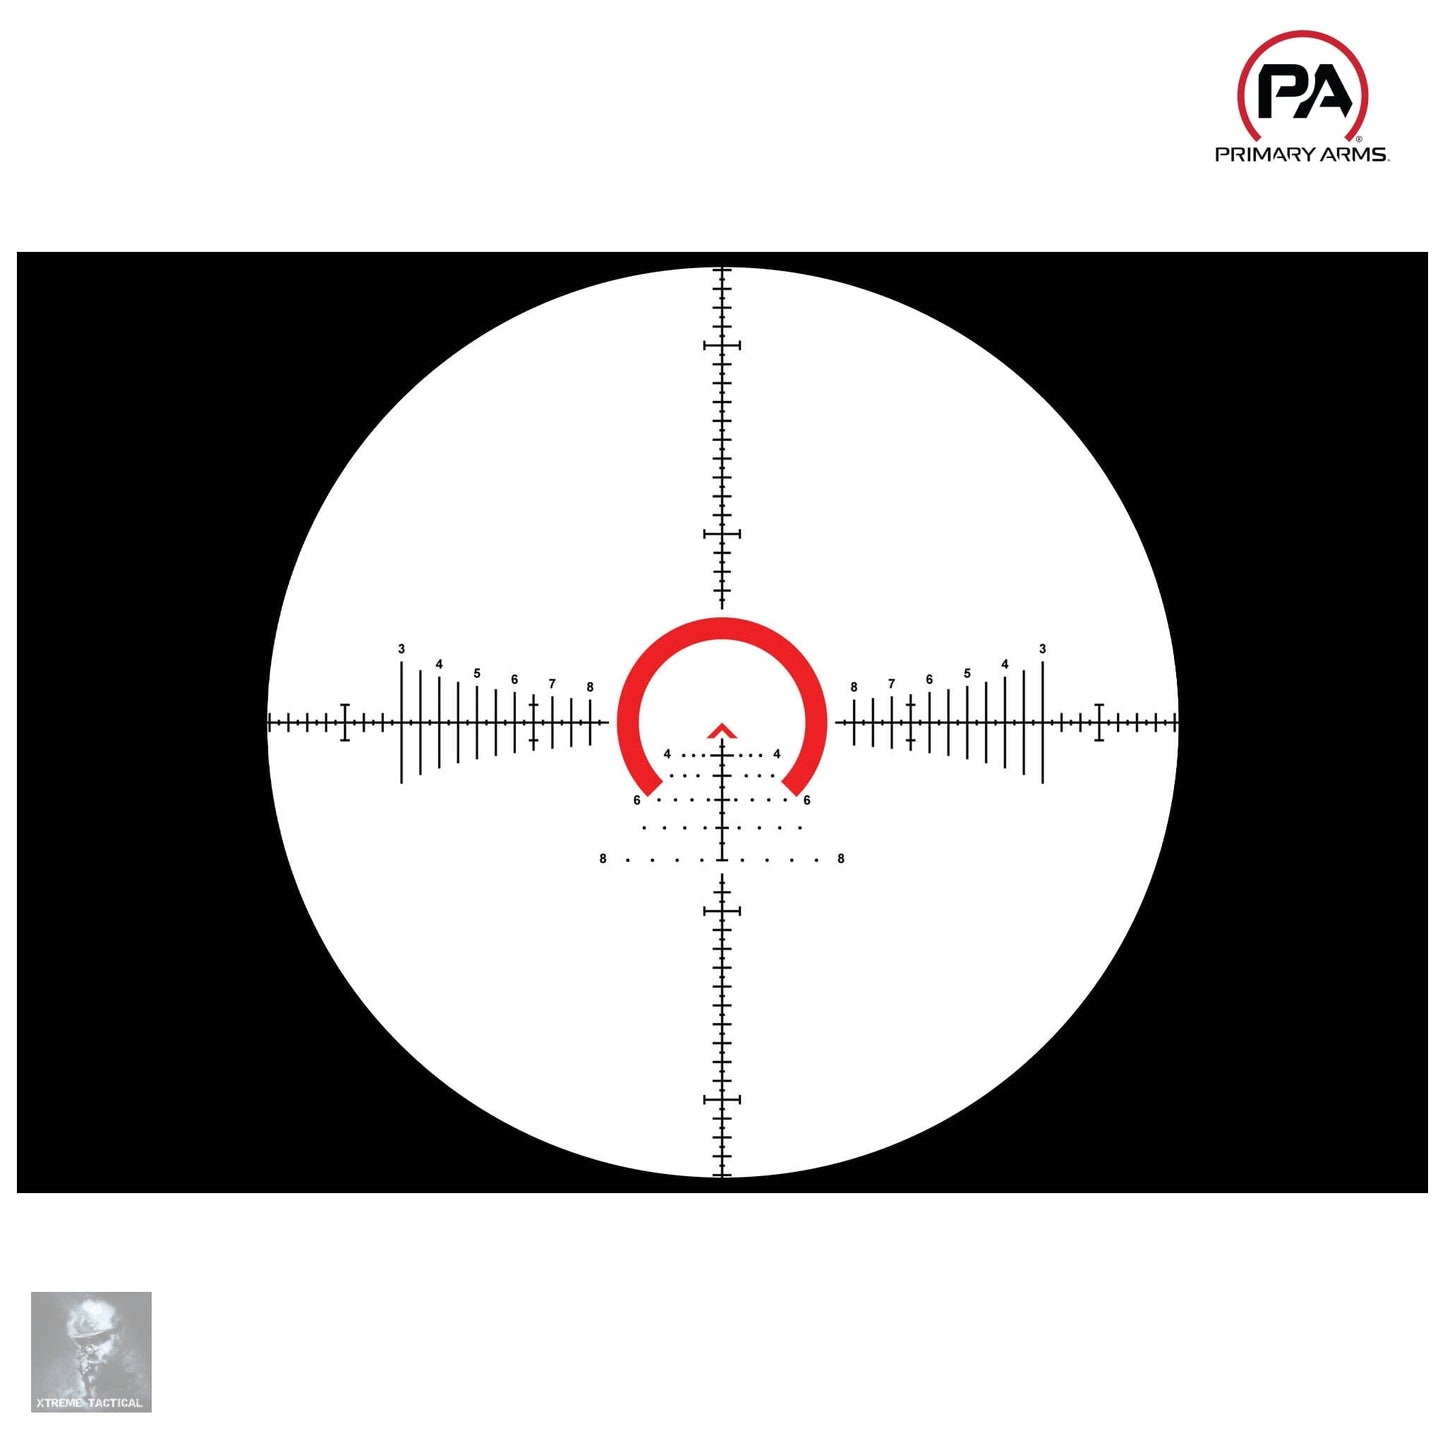 Primary Arms Compact PLxC 1-8x24 FFP Rifle Scope - ACSS Raptor M8 Yard 5.56/.308 Reticle LPVO Rifle Scope Primary Arms 